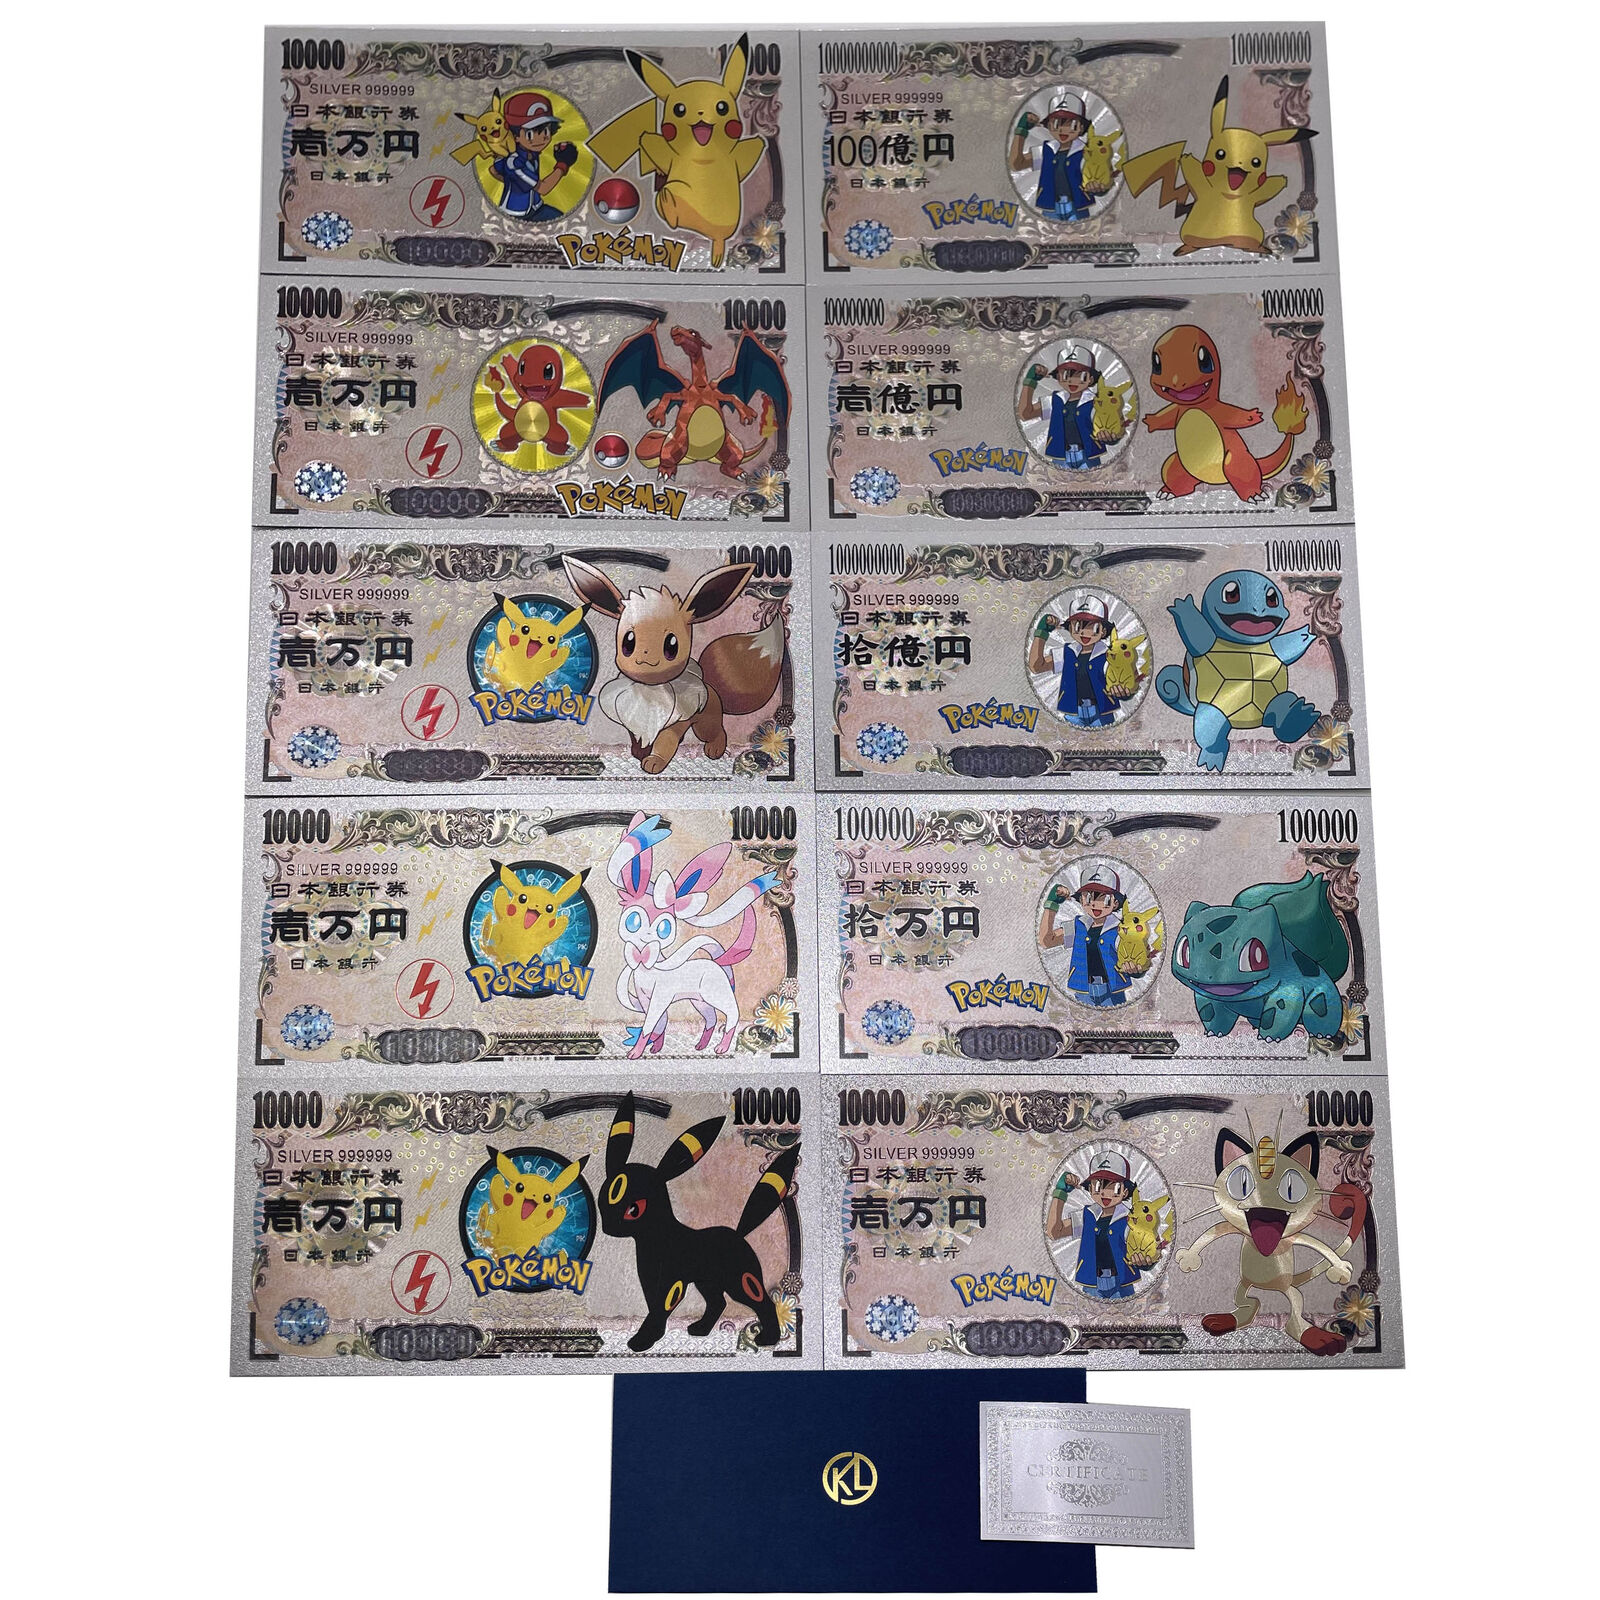 10pcs PokeemanCards Set Japan Anime silver plated banknote for collection